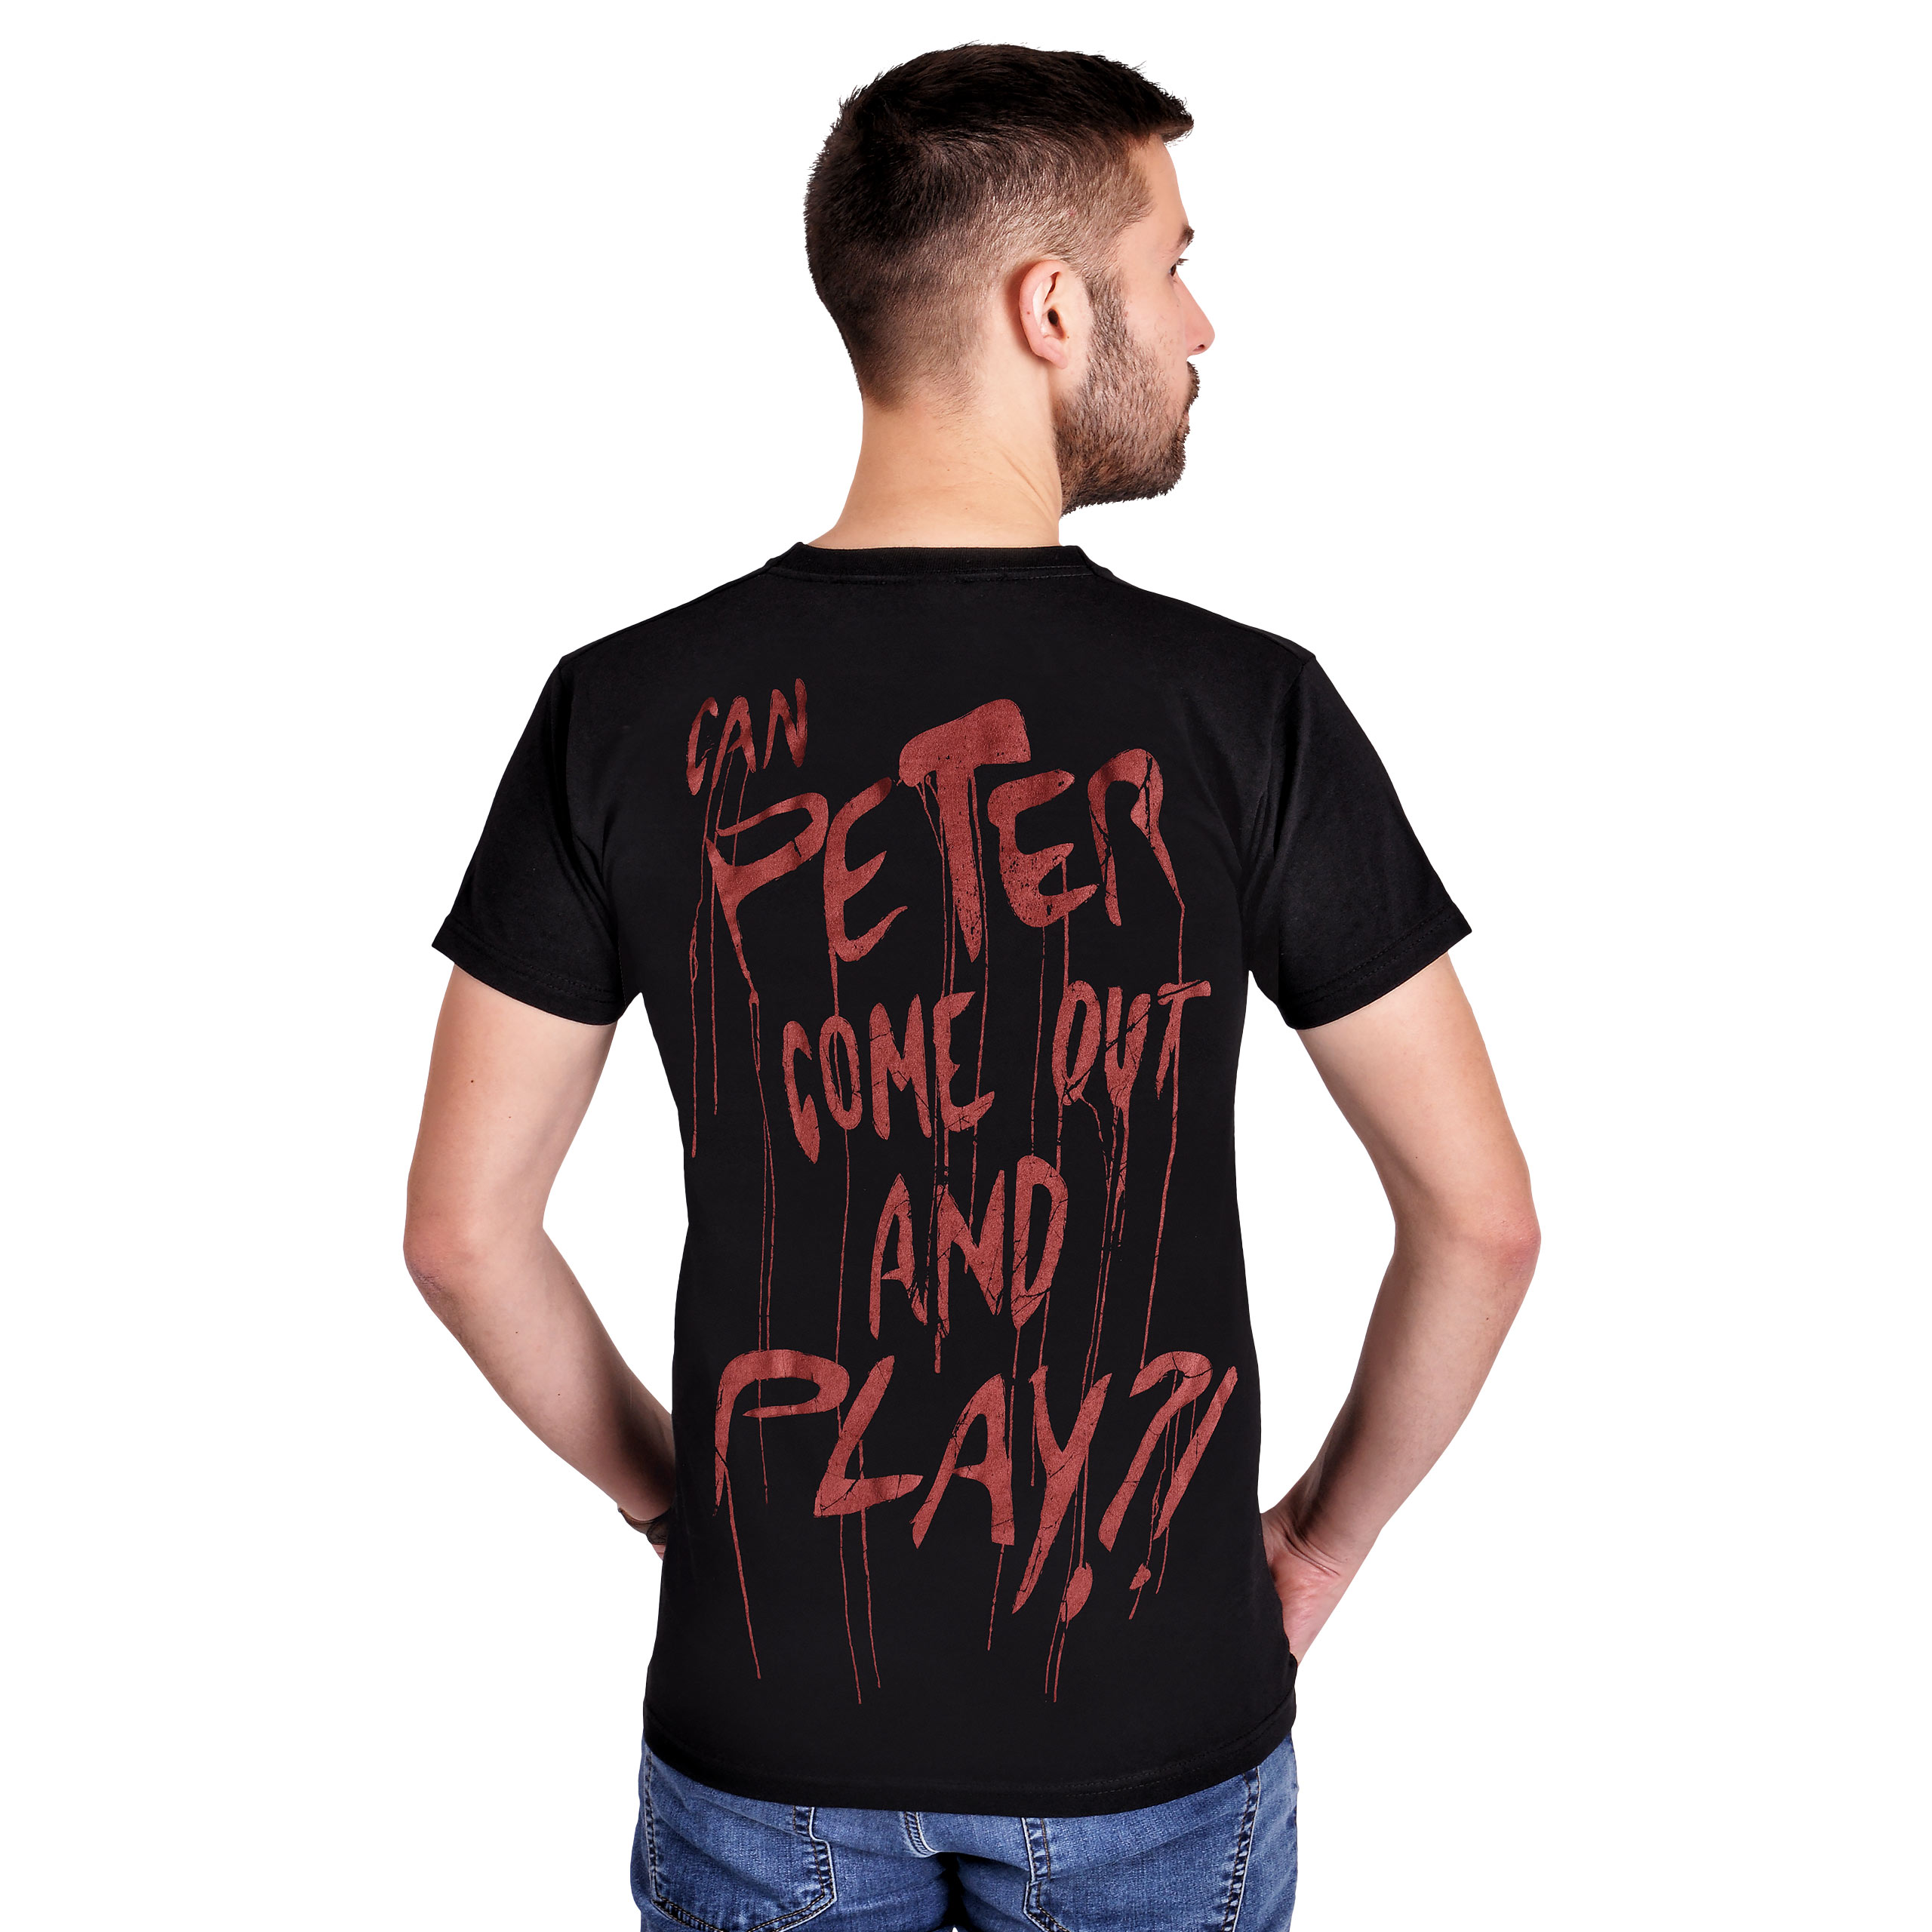 Venom - Peter Come Out And Play T-Shirt Noir